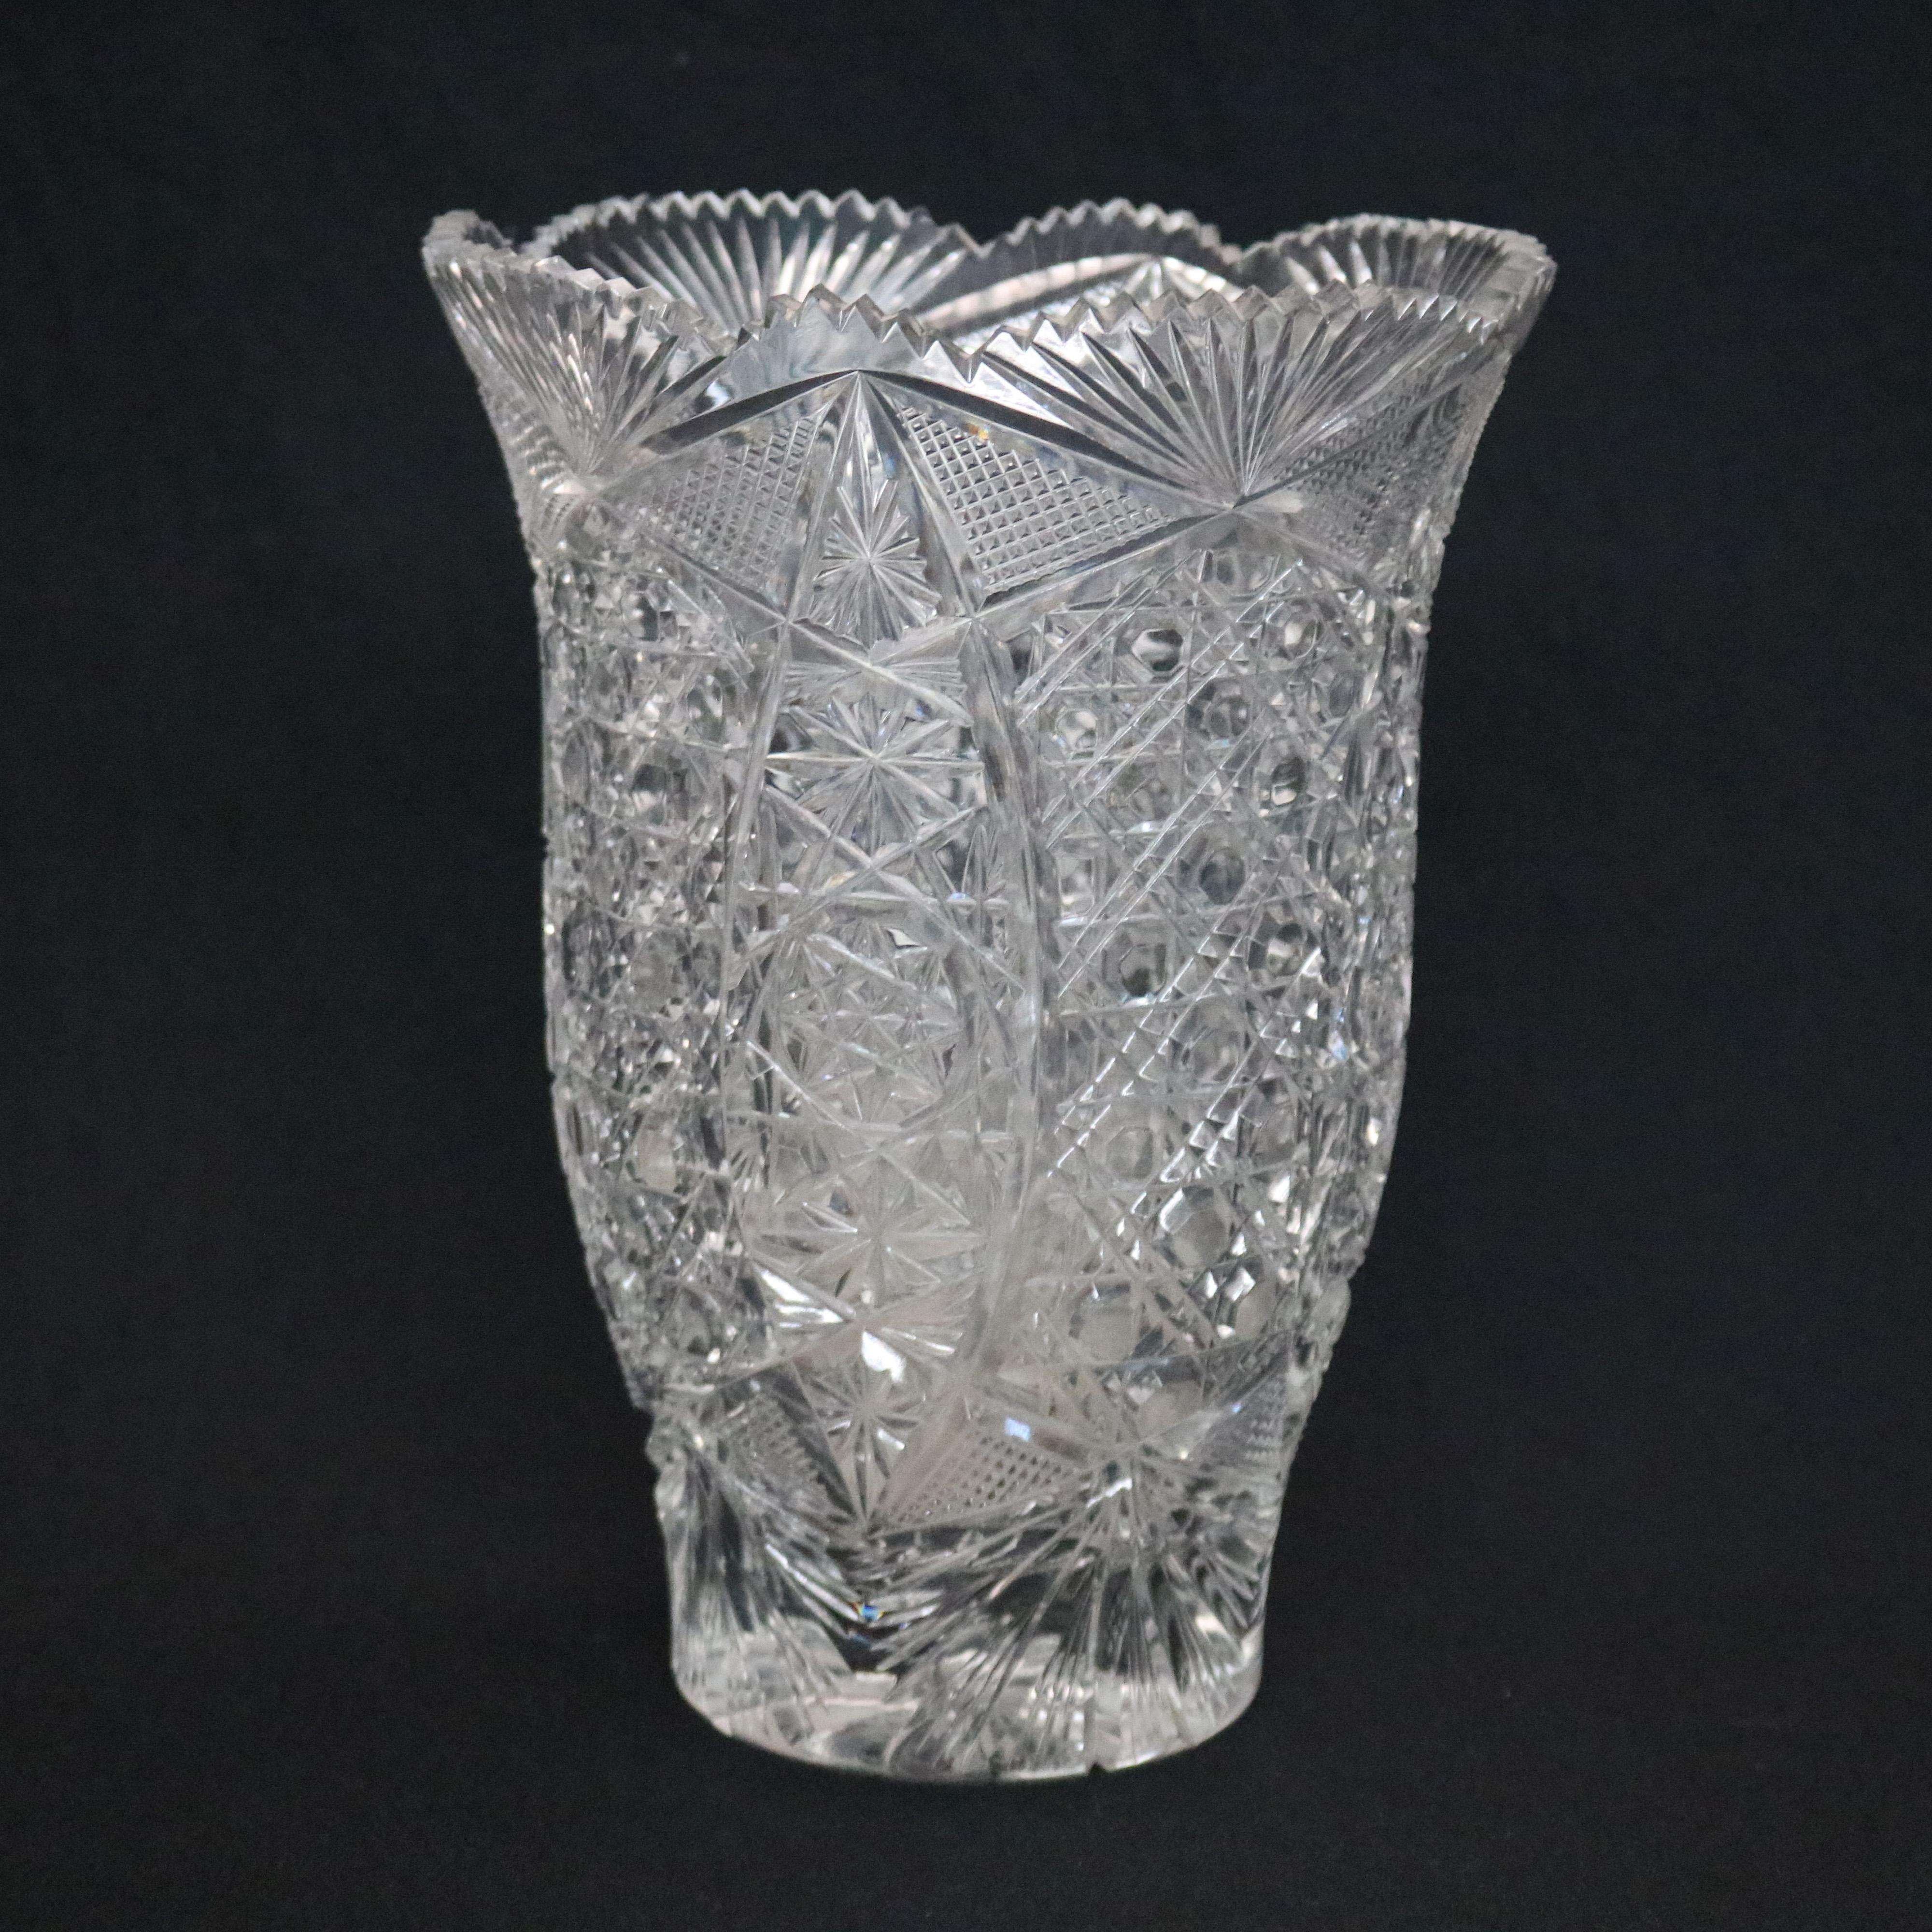 A vintage American brilliant cut glass vase offers flared and scalloped rim with stylized fan design surmounting star floral and diamond patterned vessel, star cut base as photographed, circa 1950

Measures- 11.13